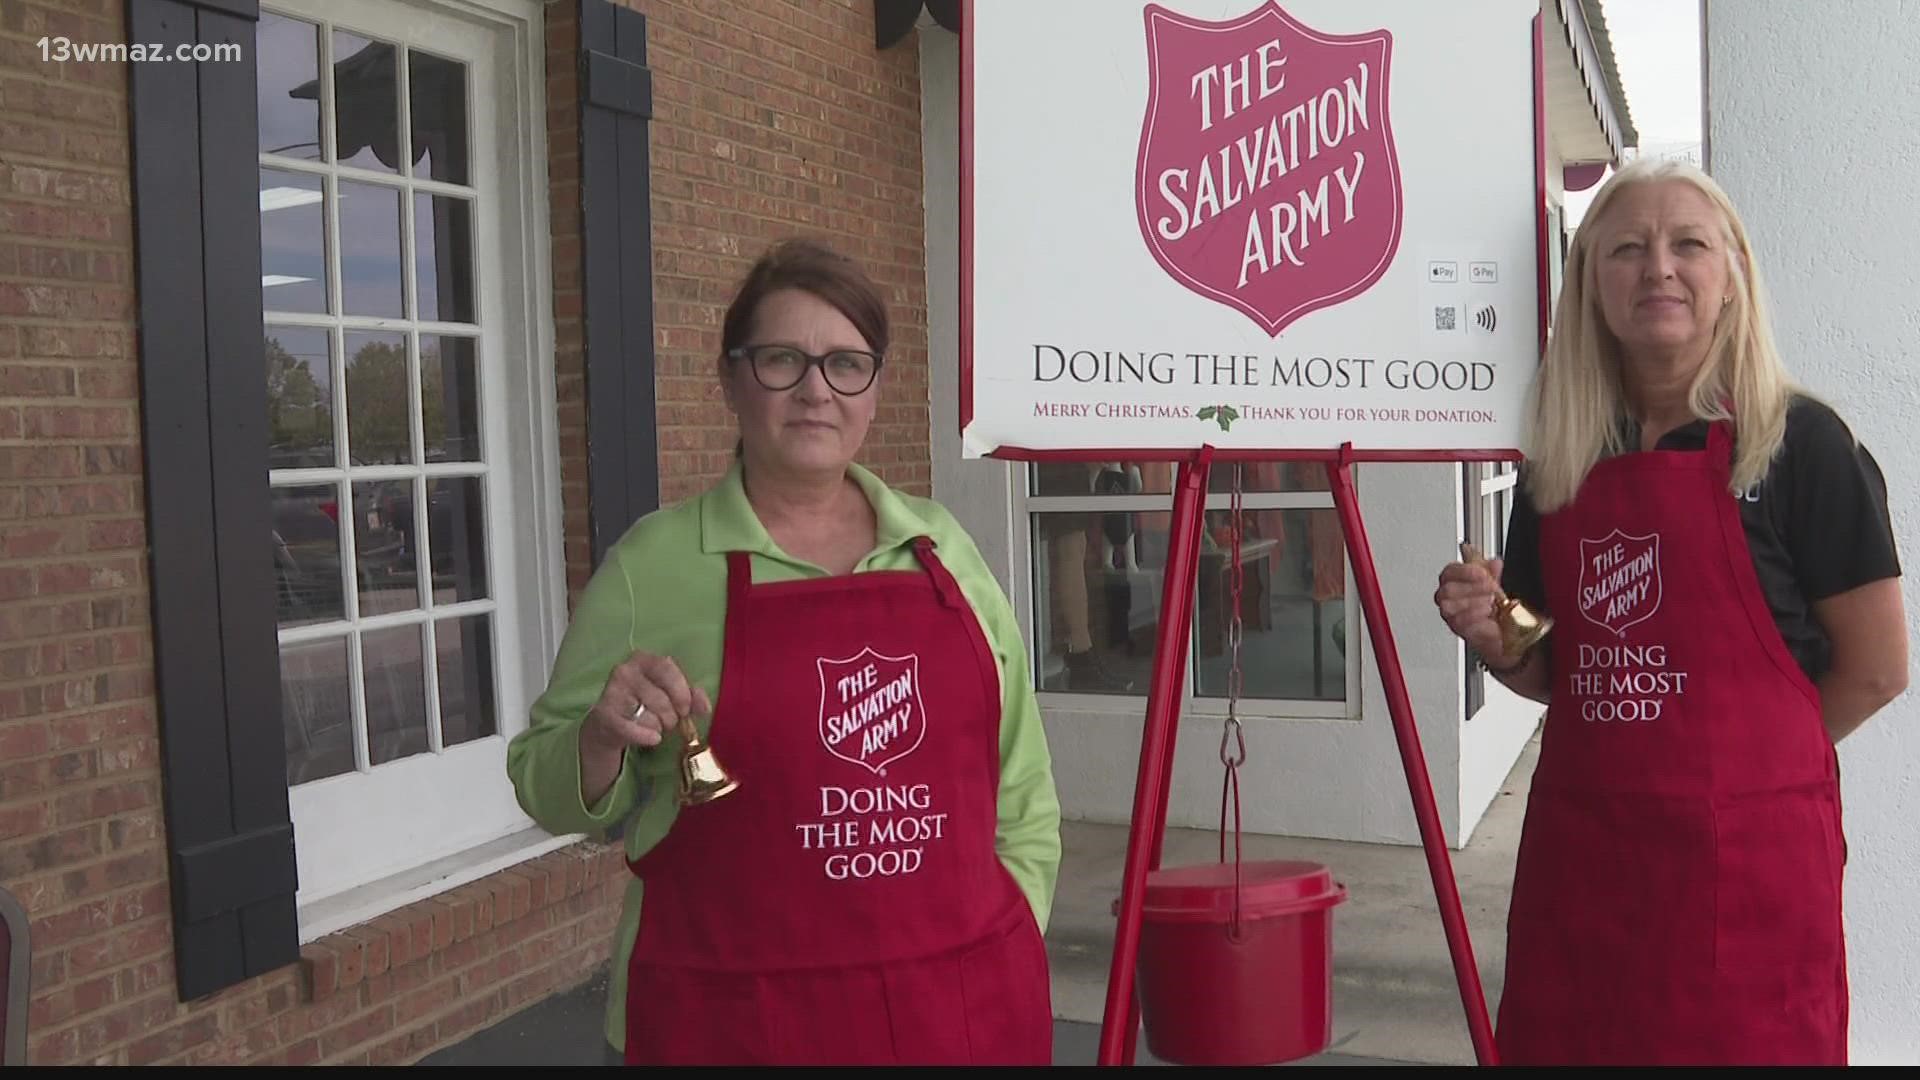 Dublin Salvation Army in need of bellringers to help families | 13wmaz.com